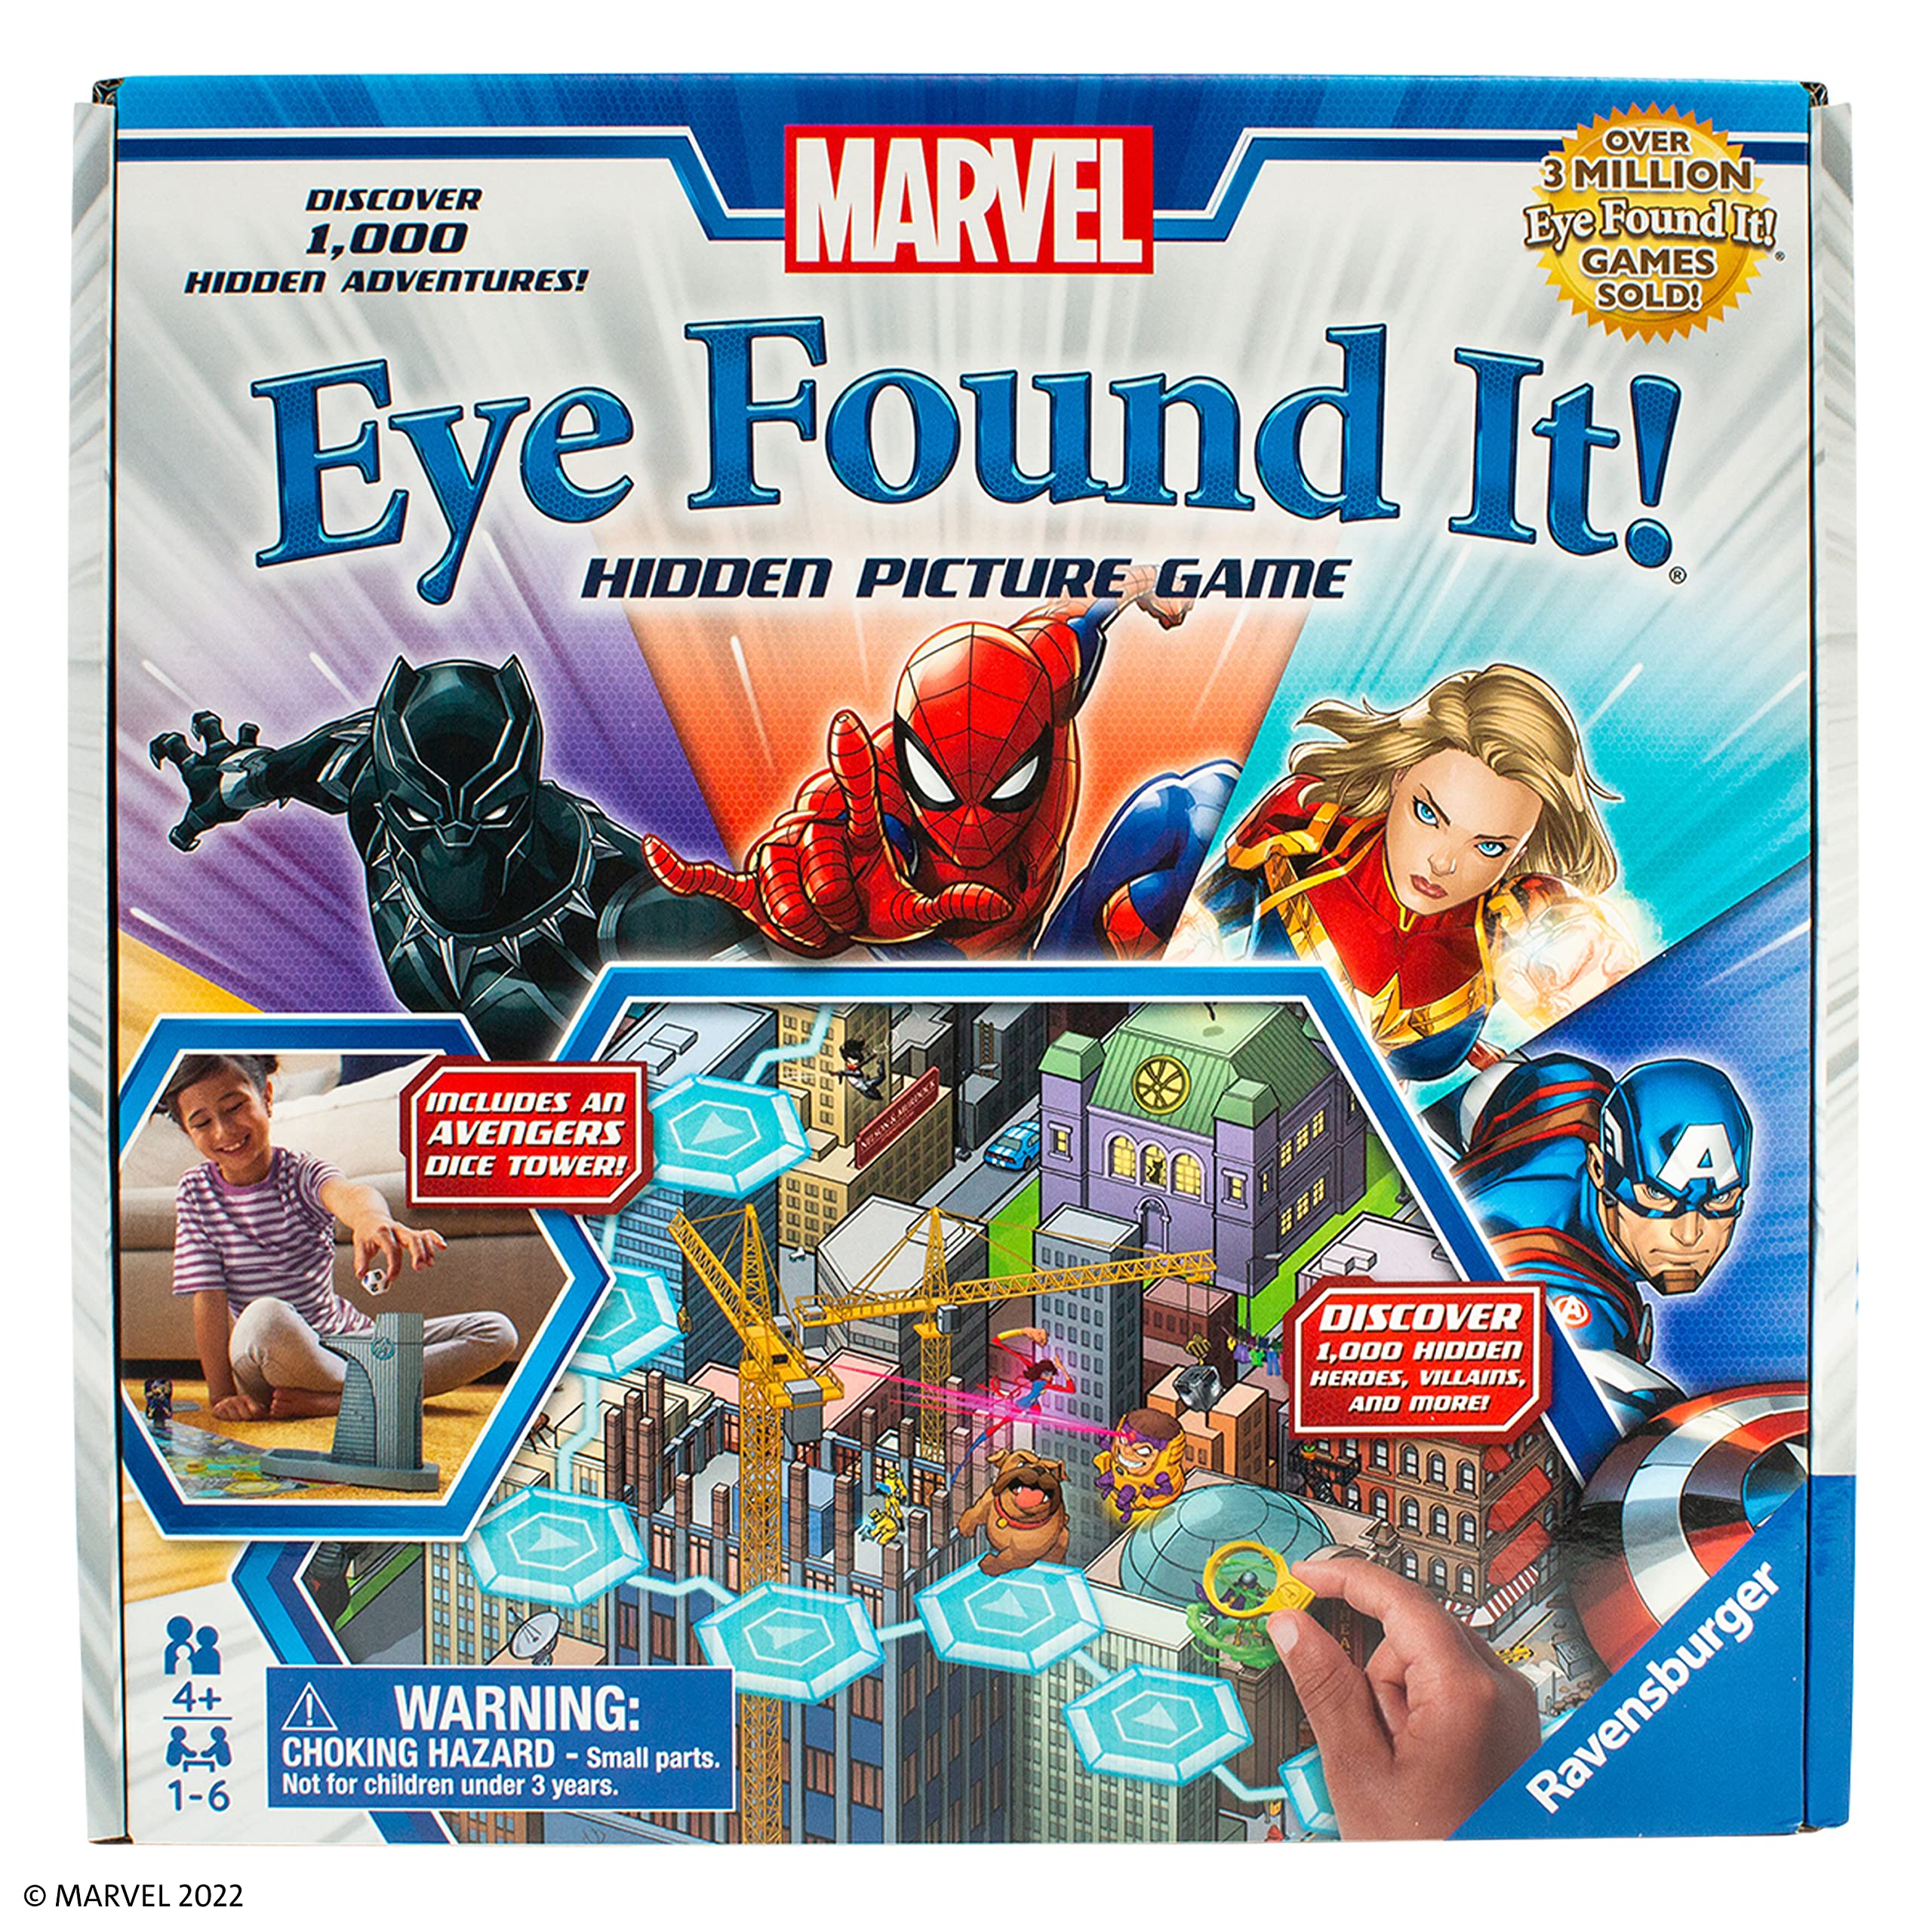 Ravensburger Marvel Eye Found It! Board Game for Boys and Girls Ages 4 and Up - A Fun Family Game